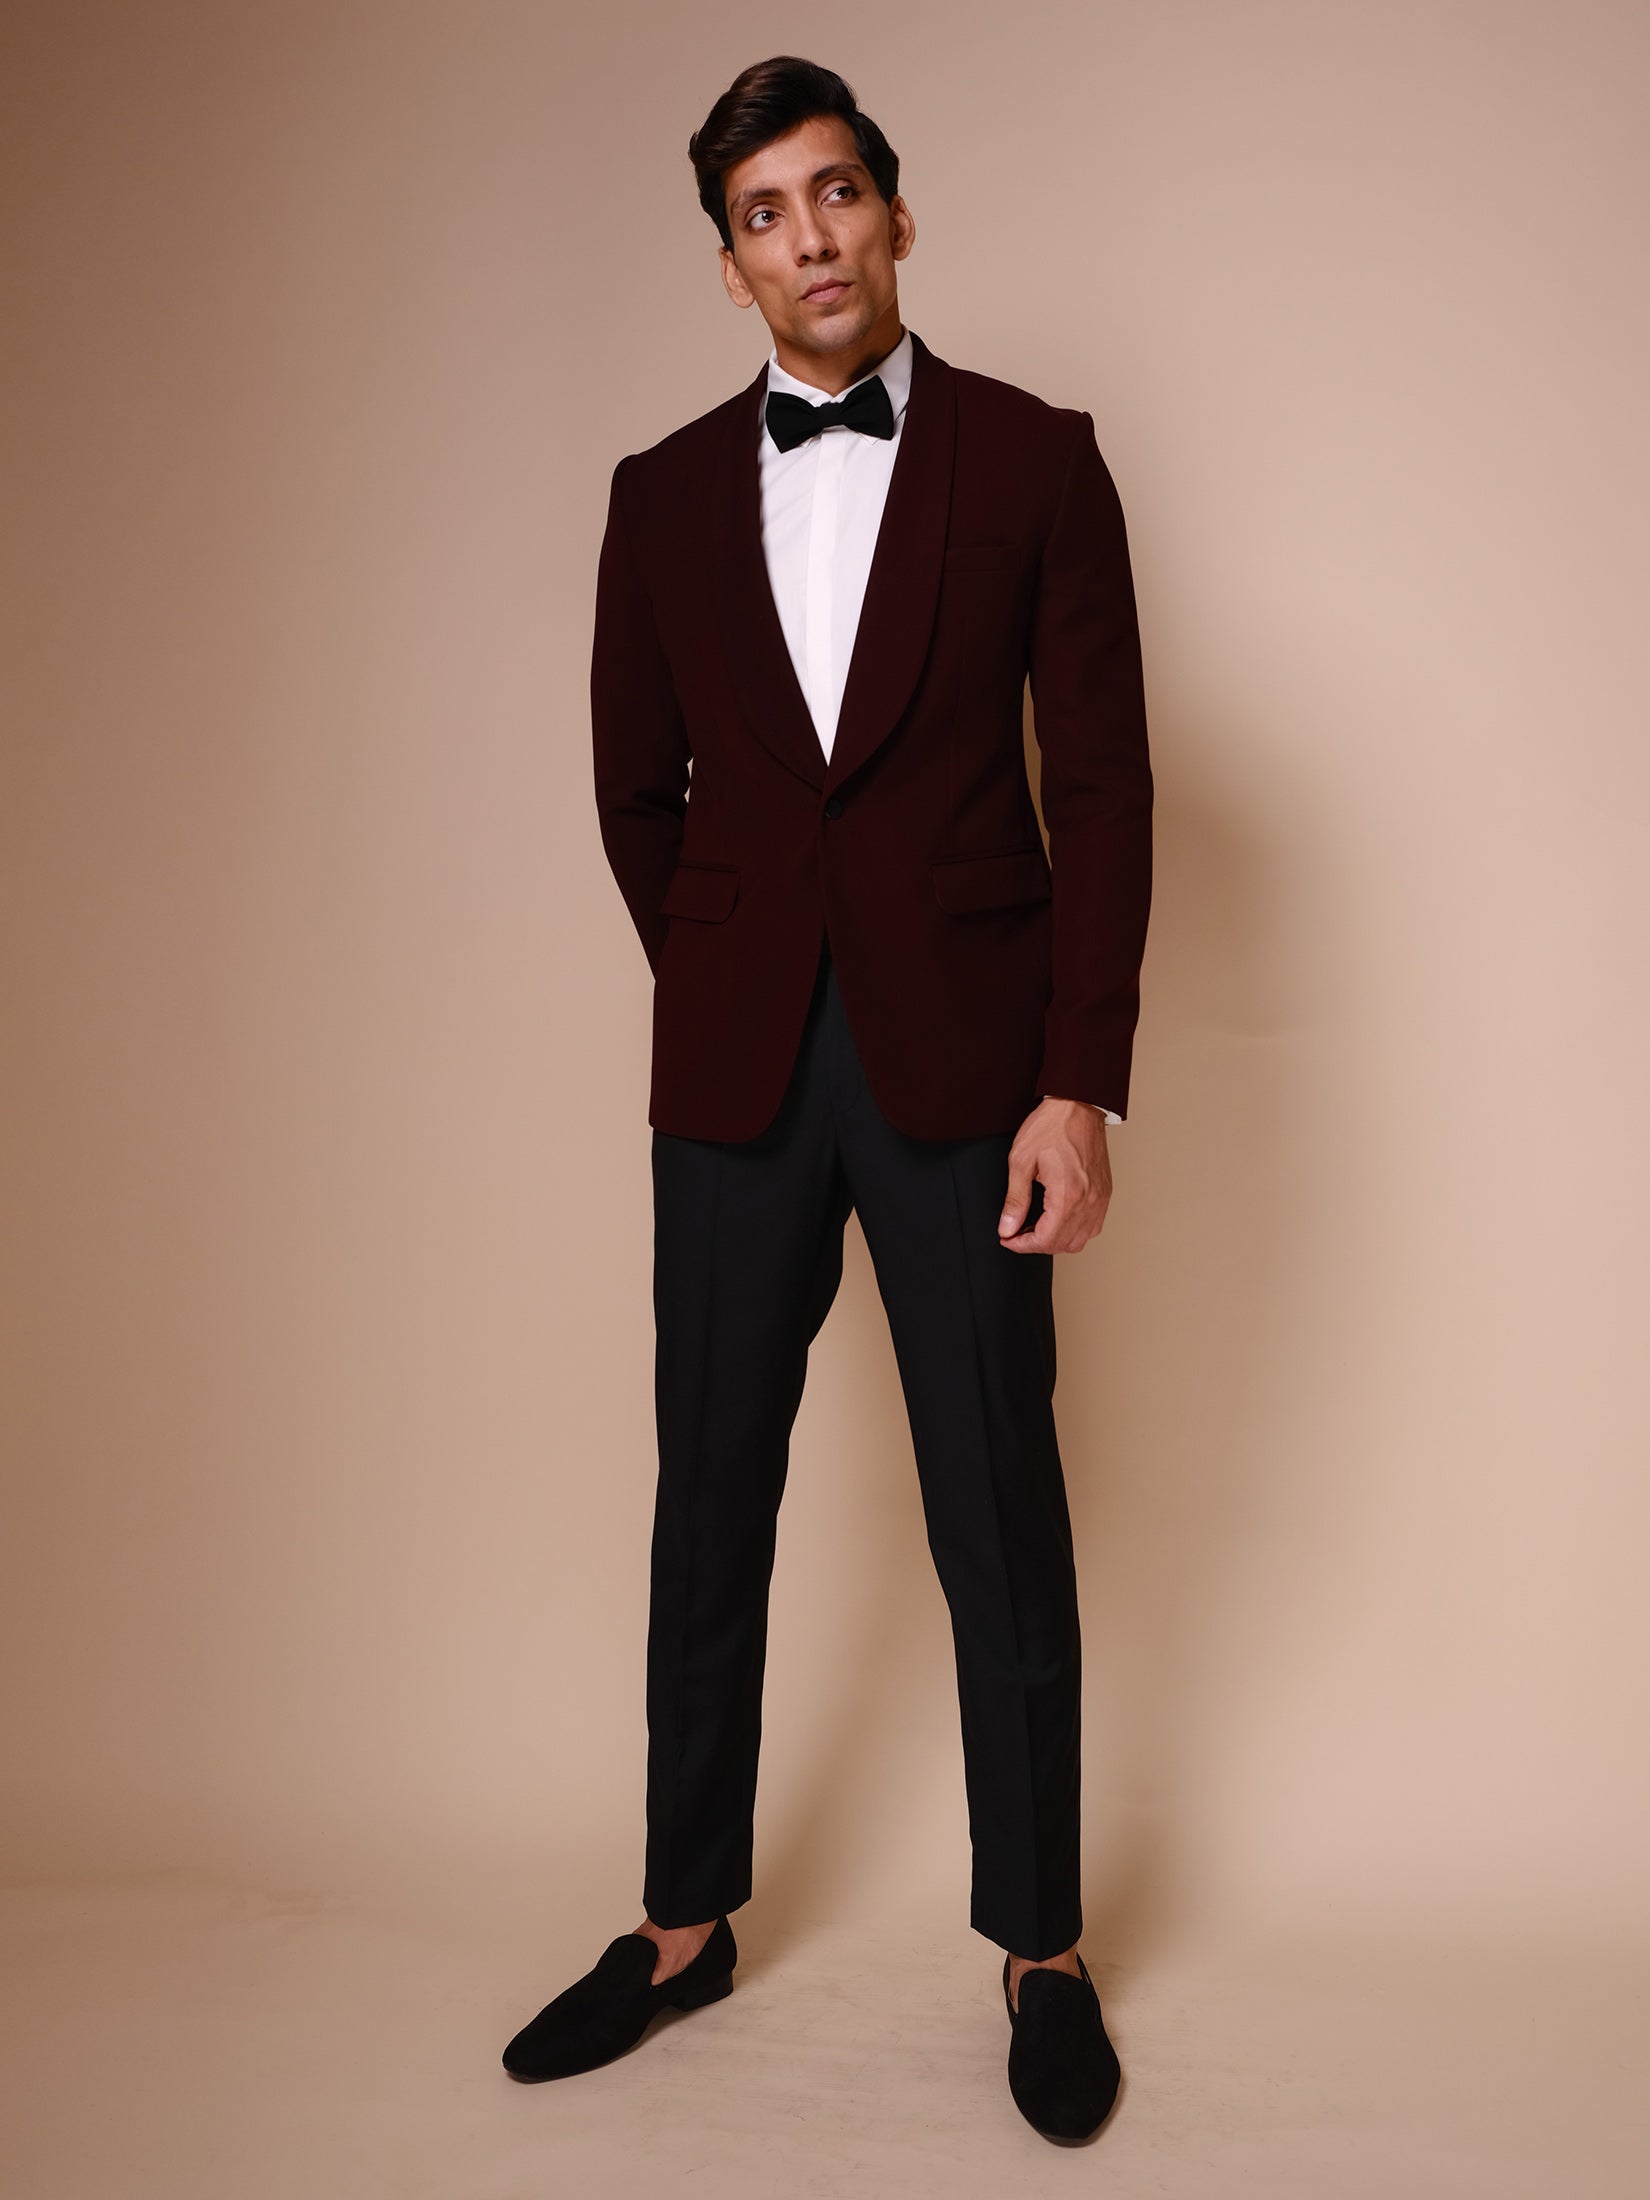 Burgandy Shawl Lapel Tuxedo Paired With Trousers And White Shirt